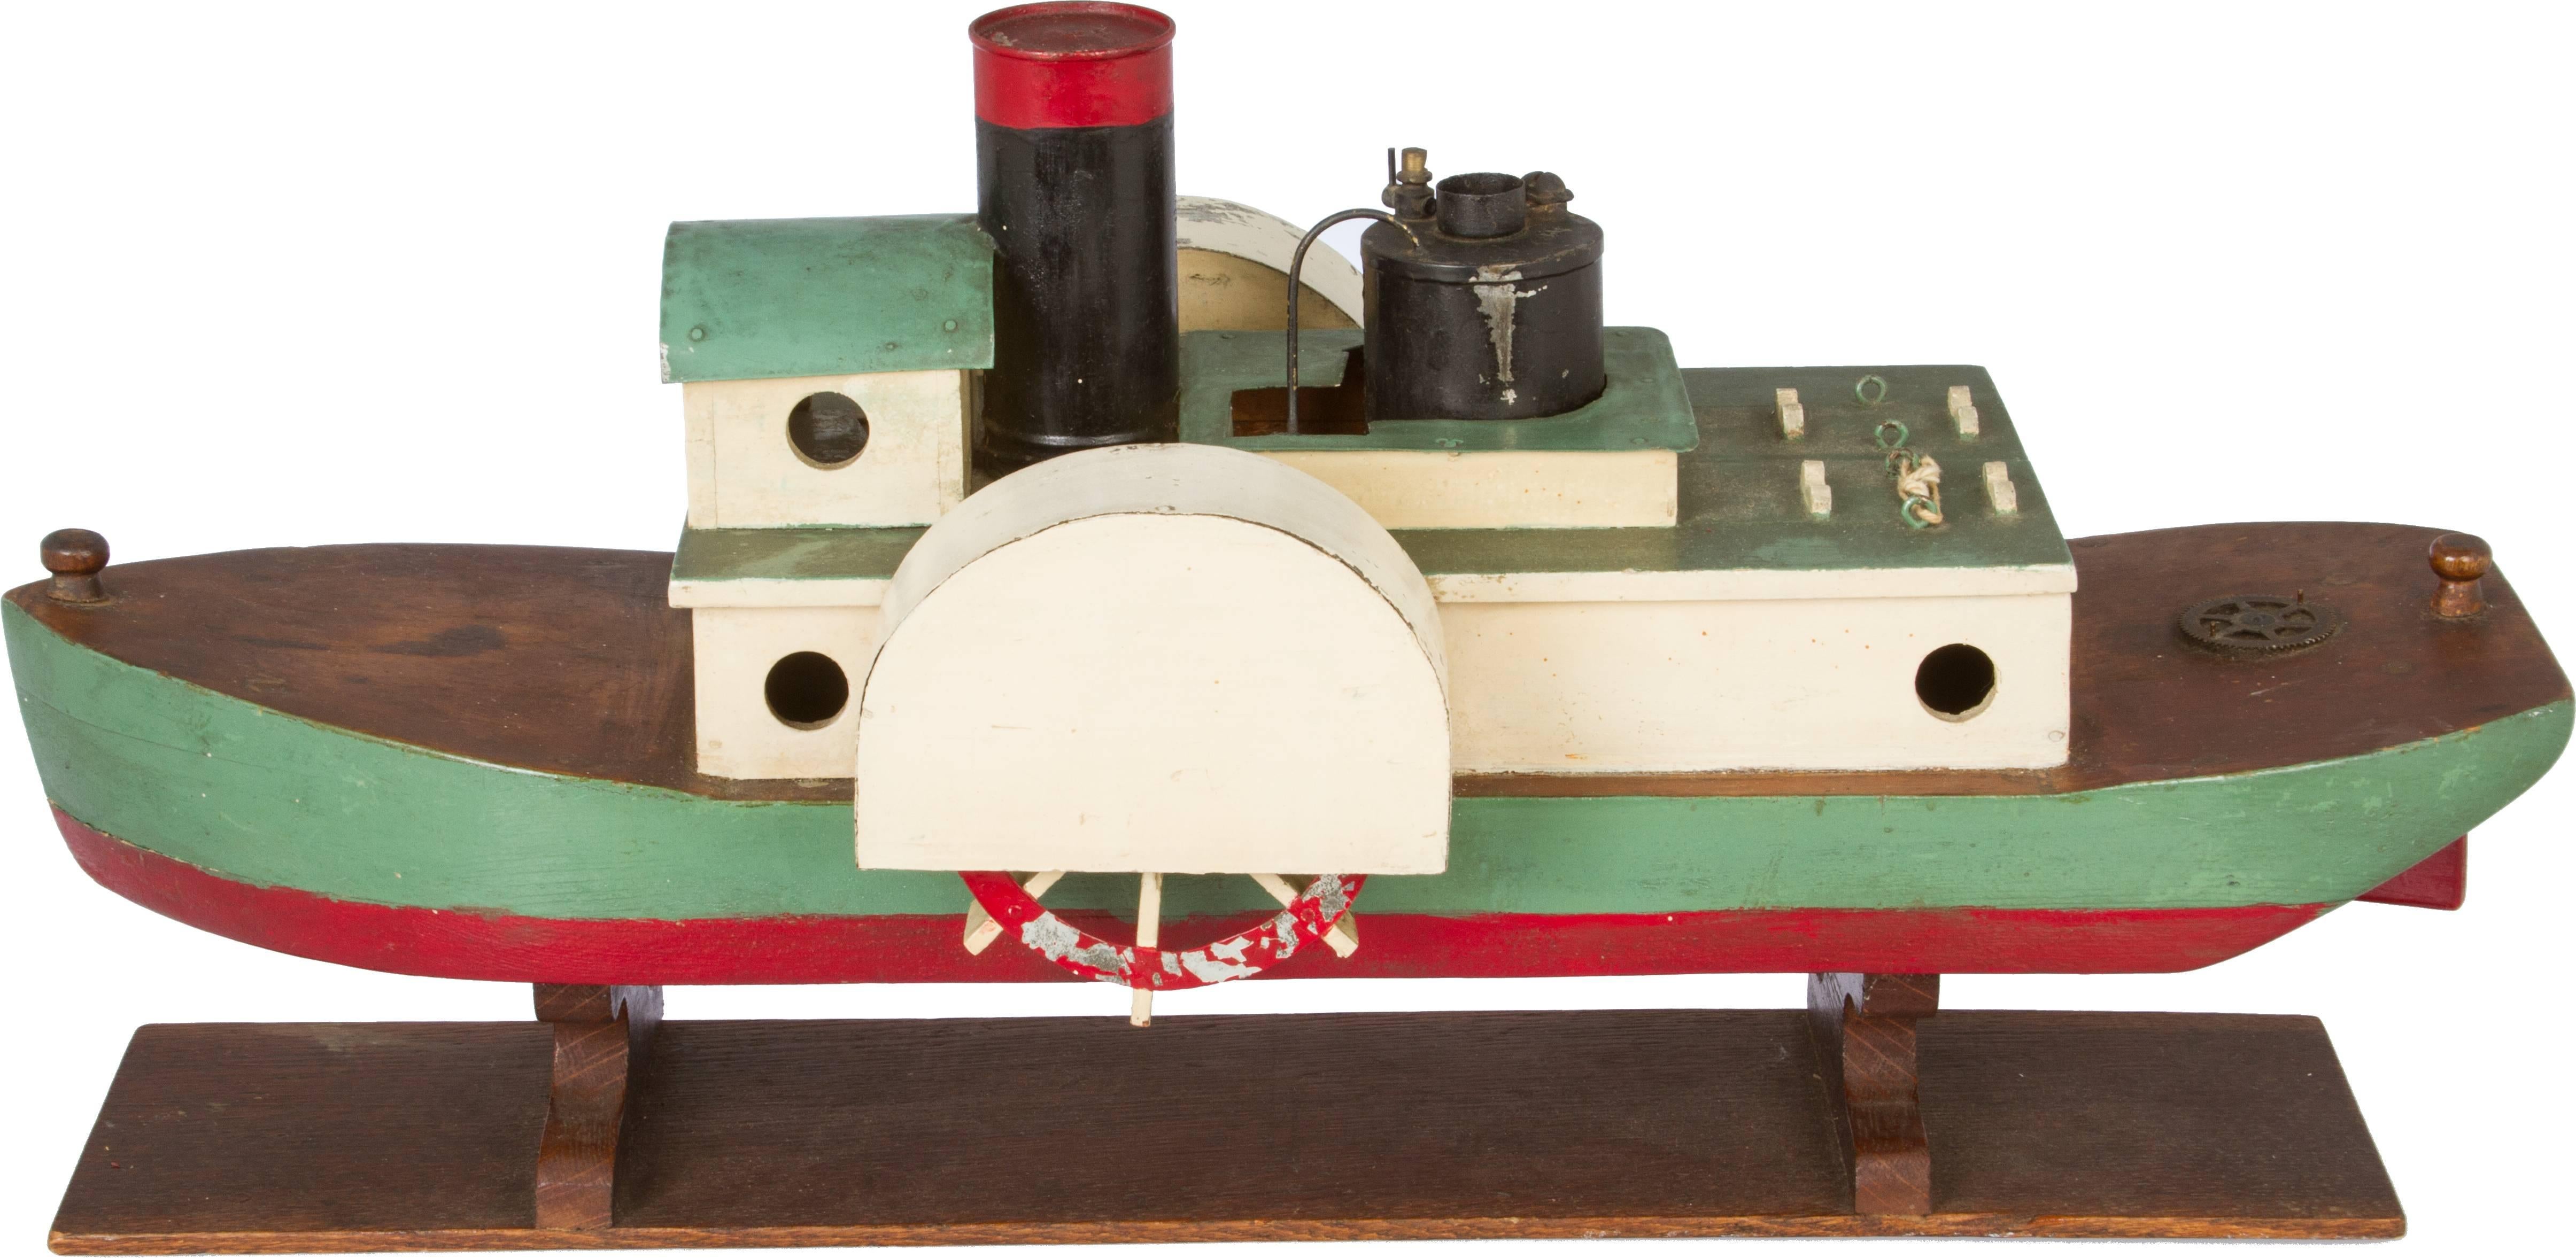 This fun Folk Art steam paddle boat is alcohol operated. It looks like the burner was never used.